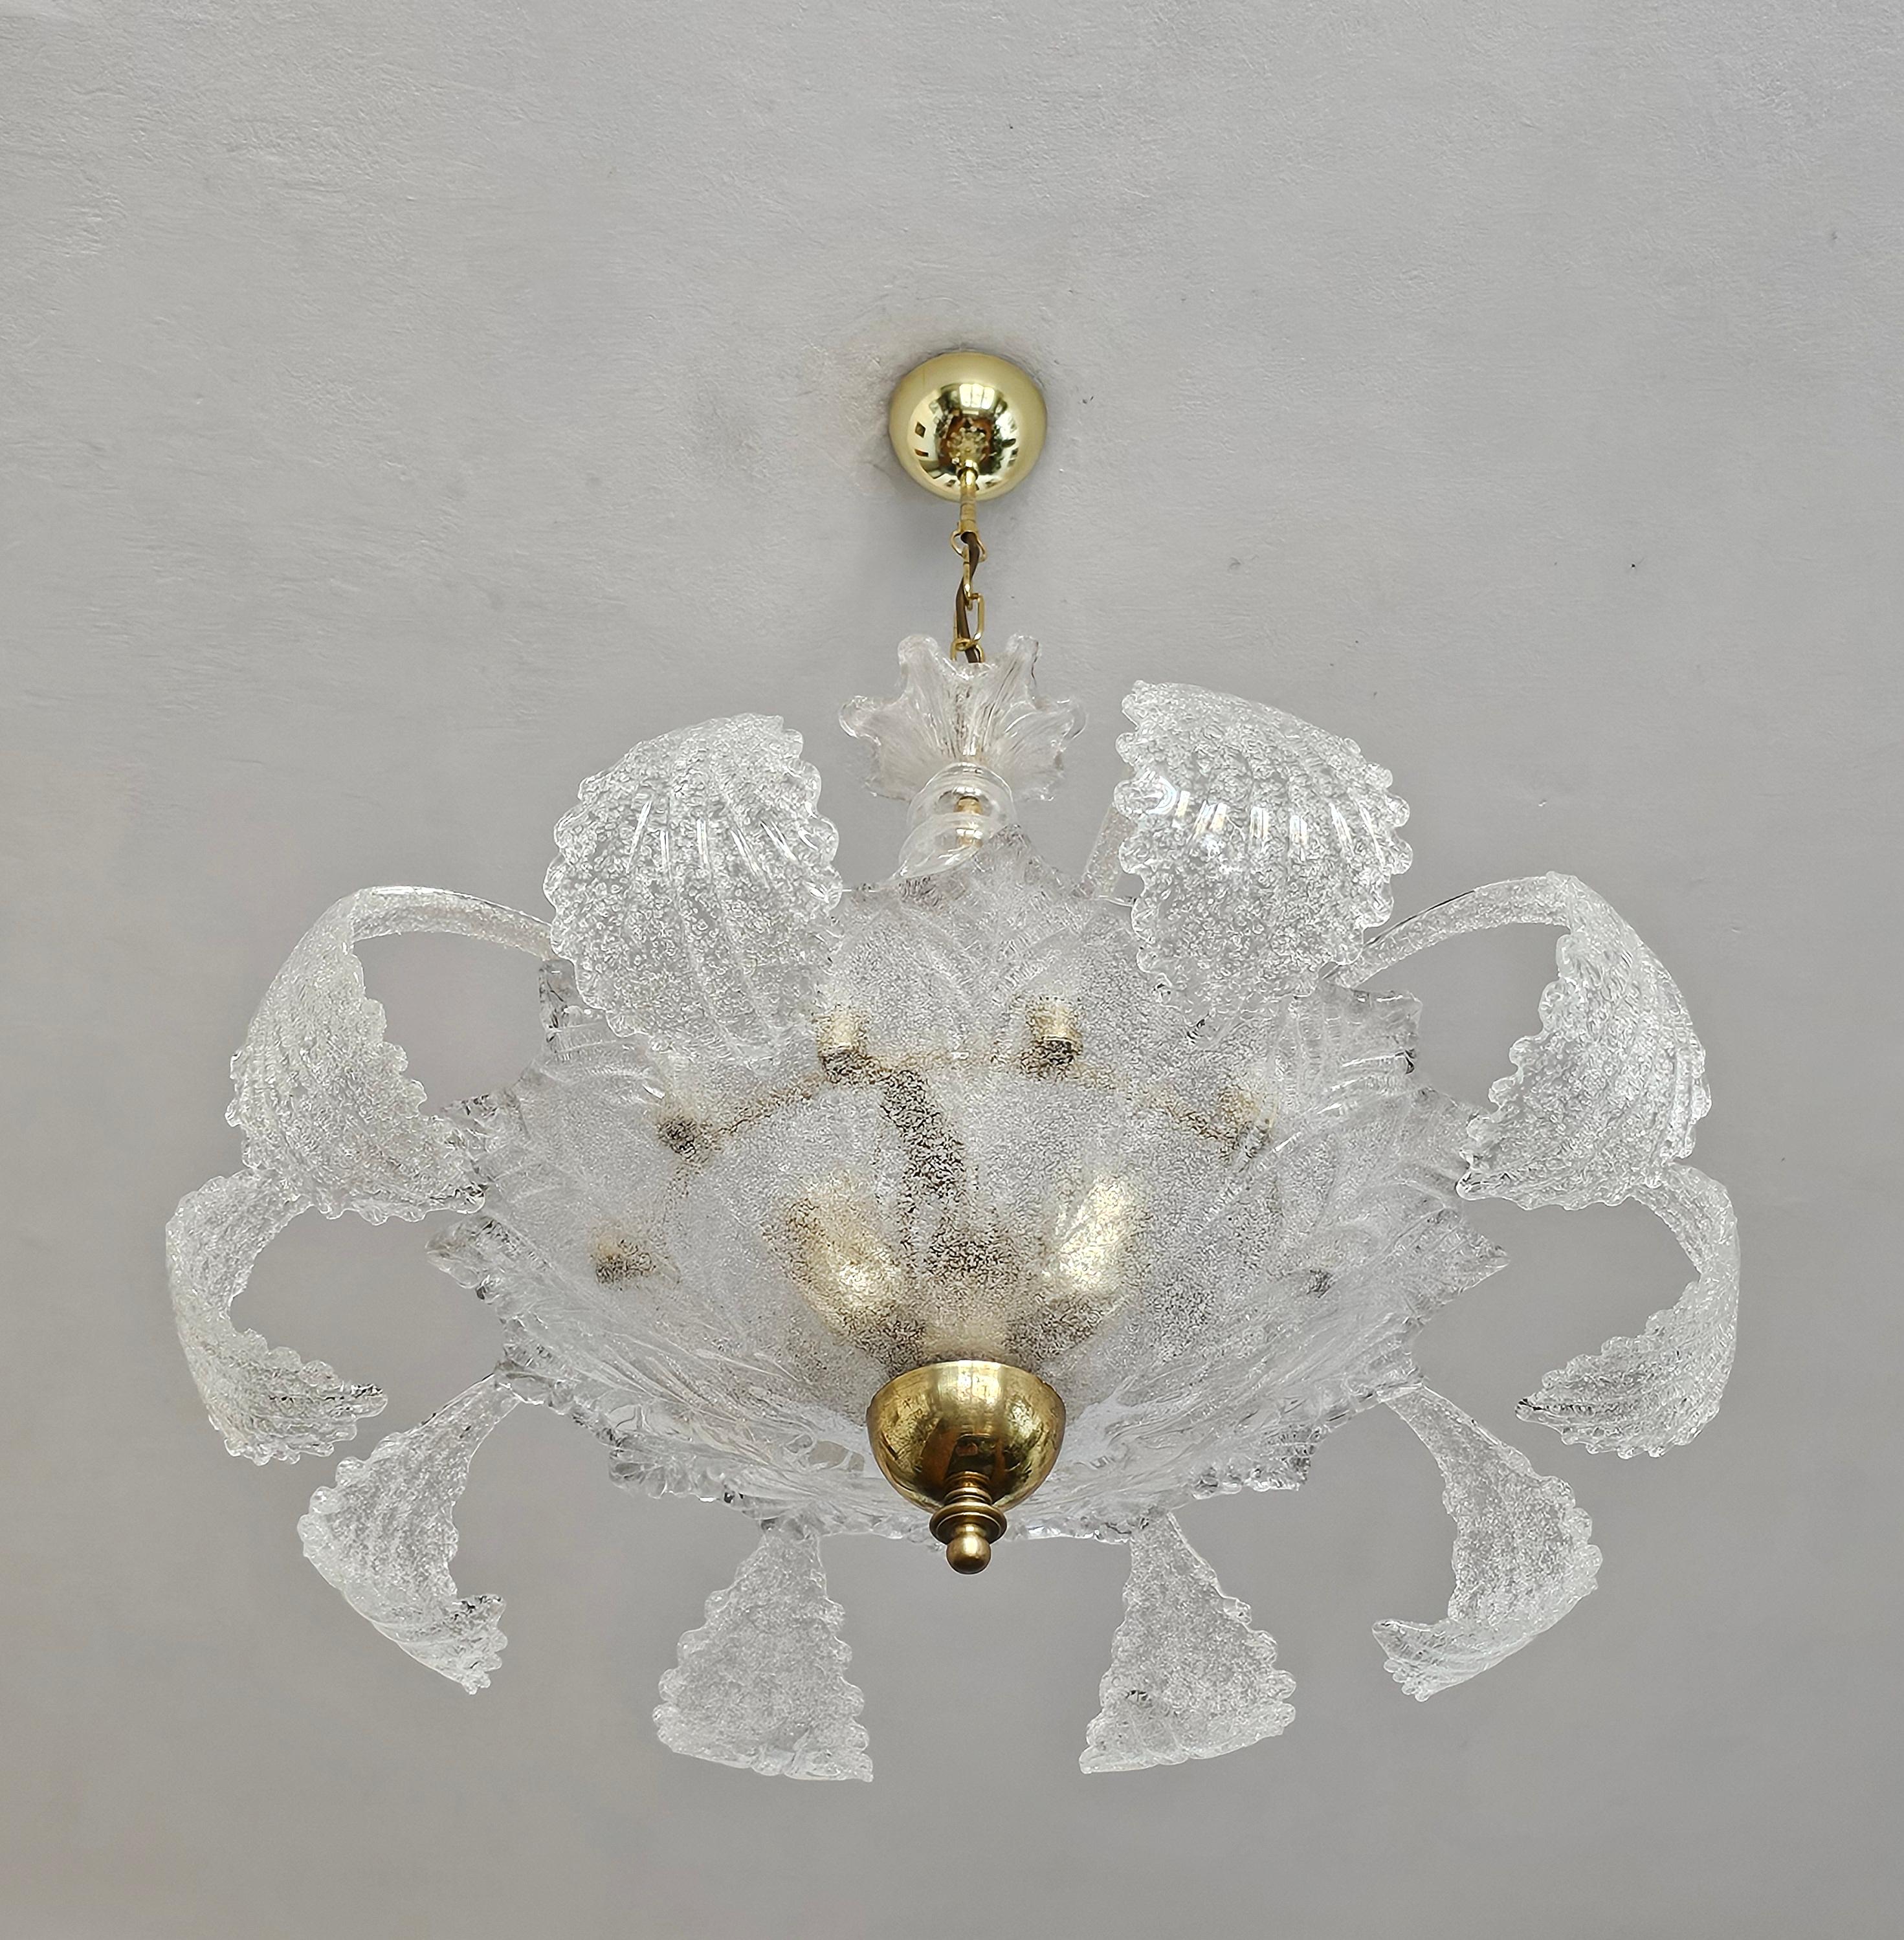 Art Deco Chandelier in style of Barovier & Toso, 10 Murano leaves, Italy 1950s For Sale 9